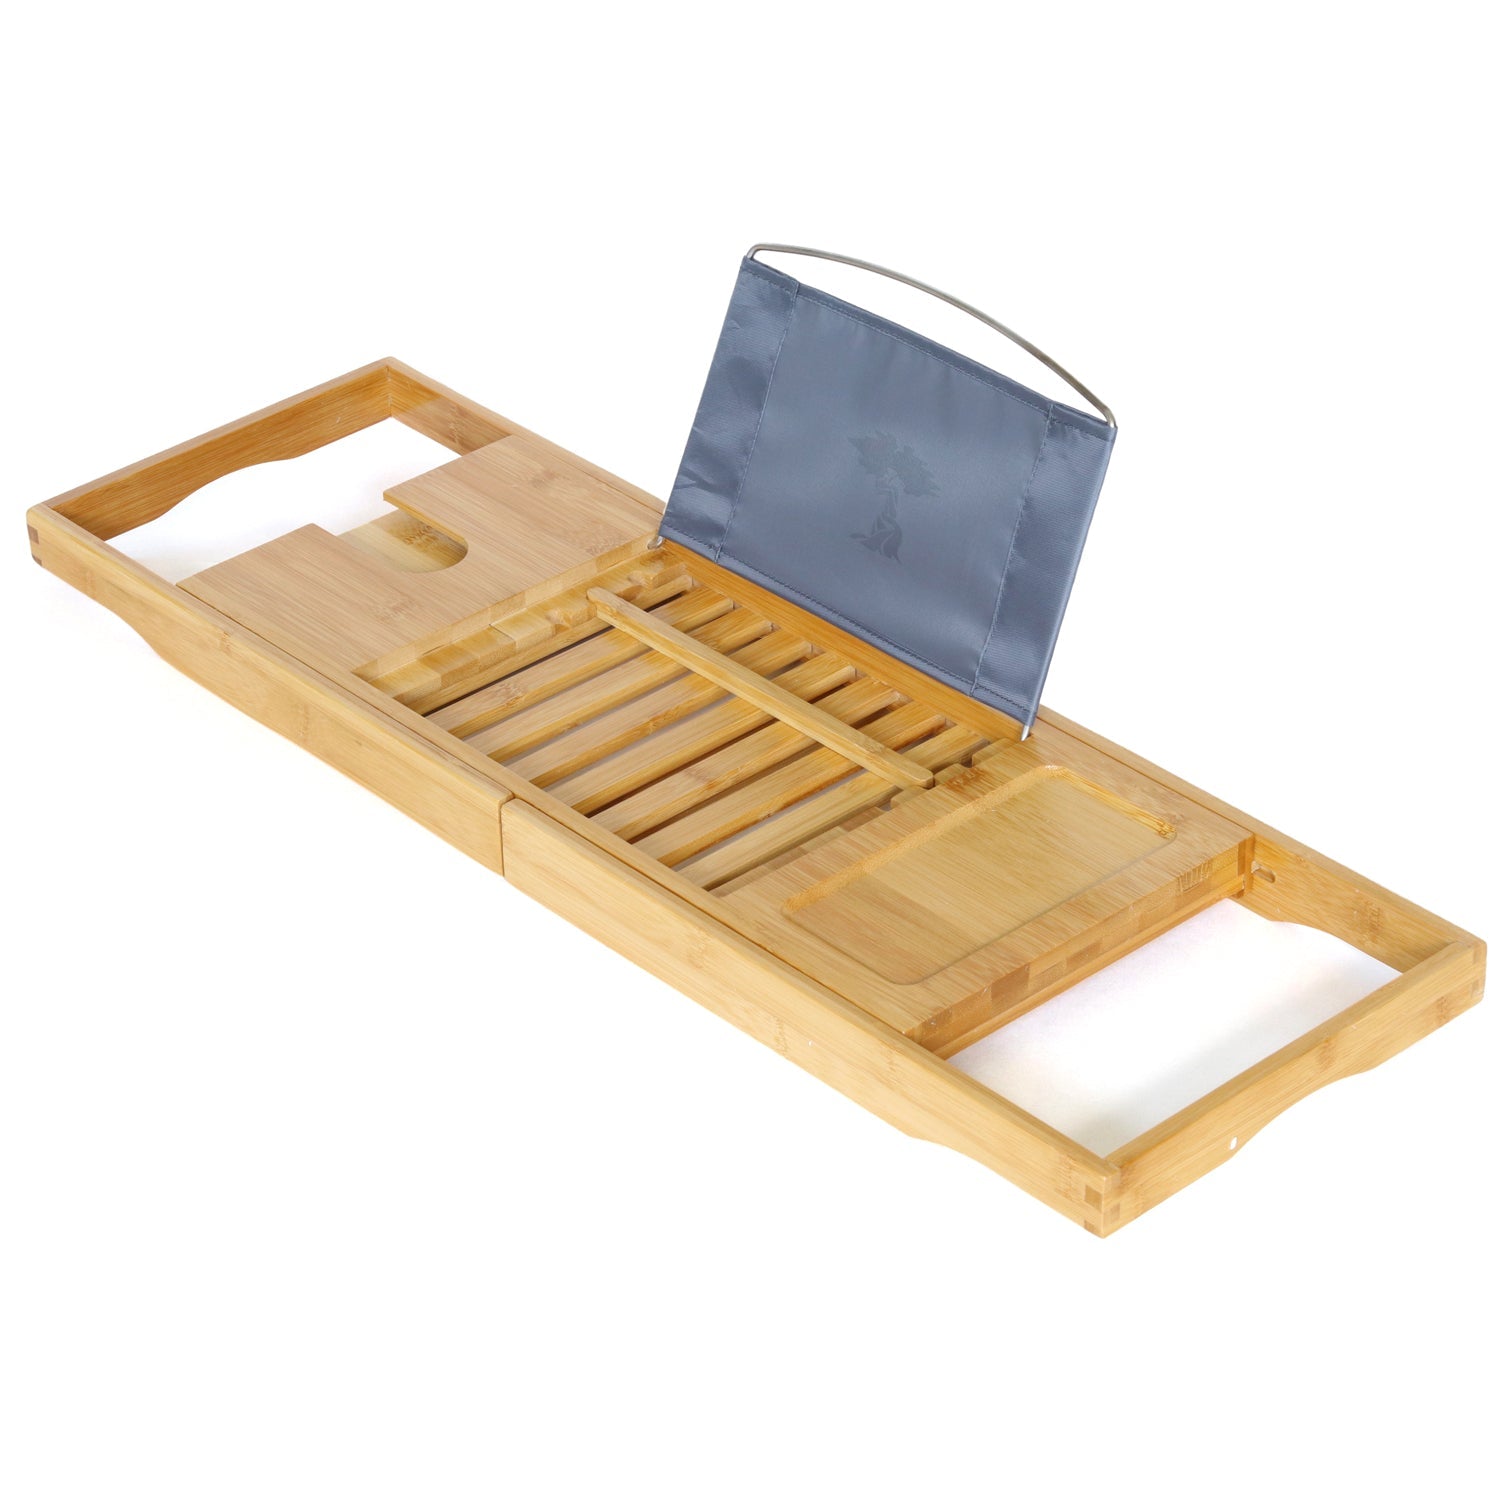 ToiletTree Products Stainless Steel & Bamboo Bathtub Caddy